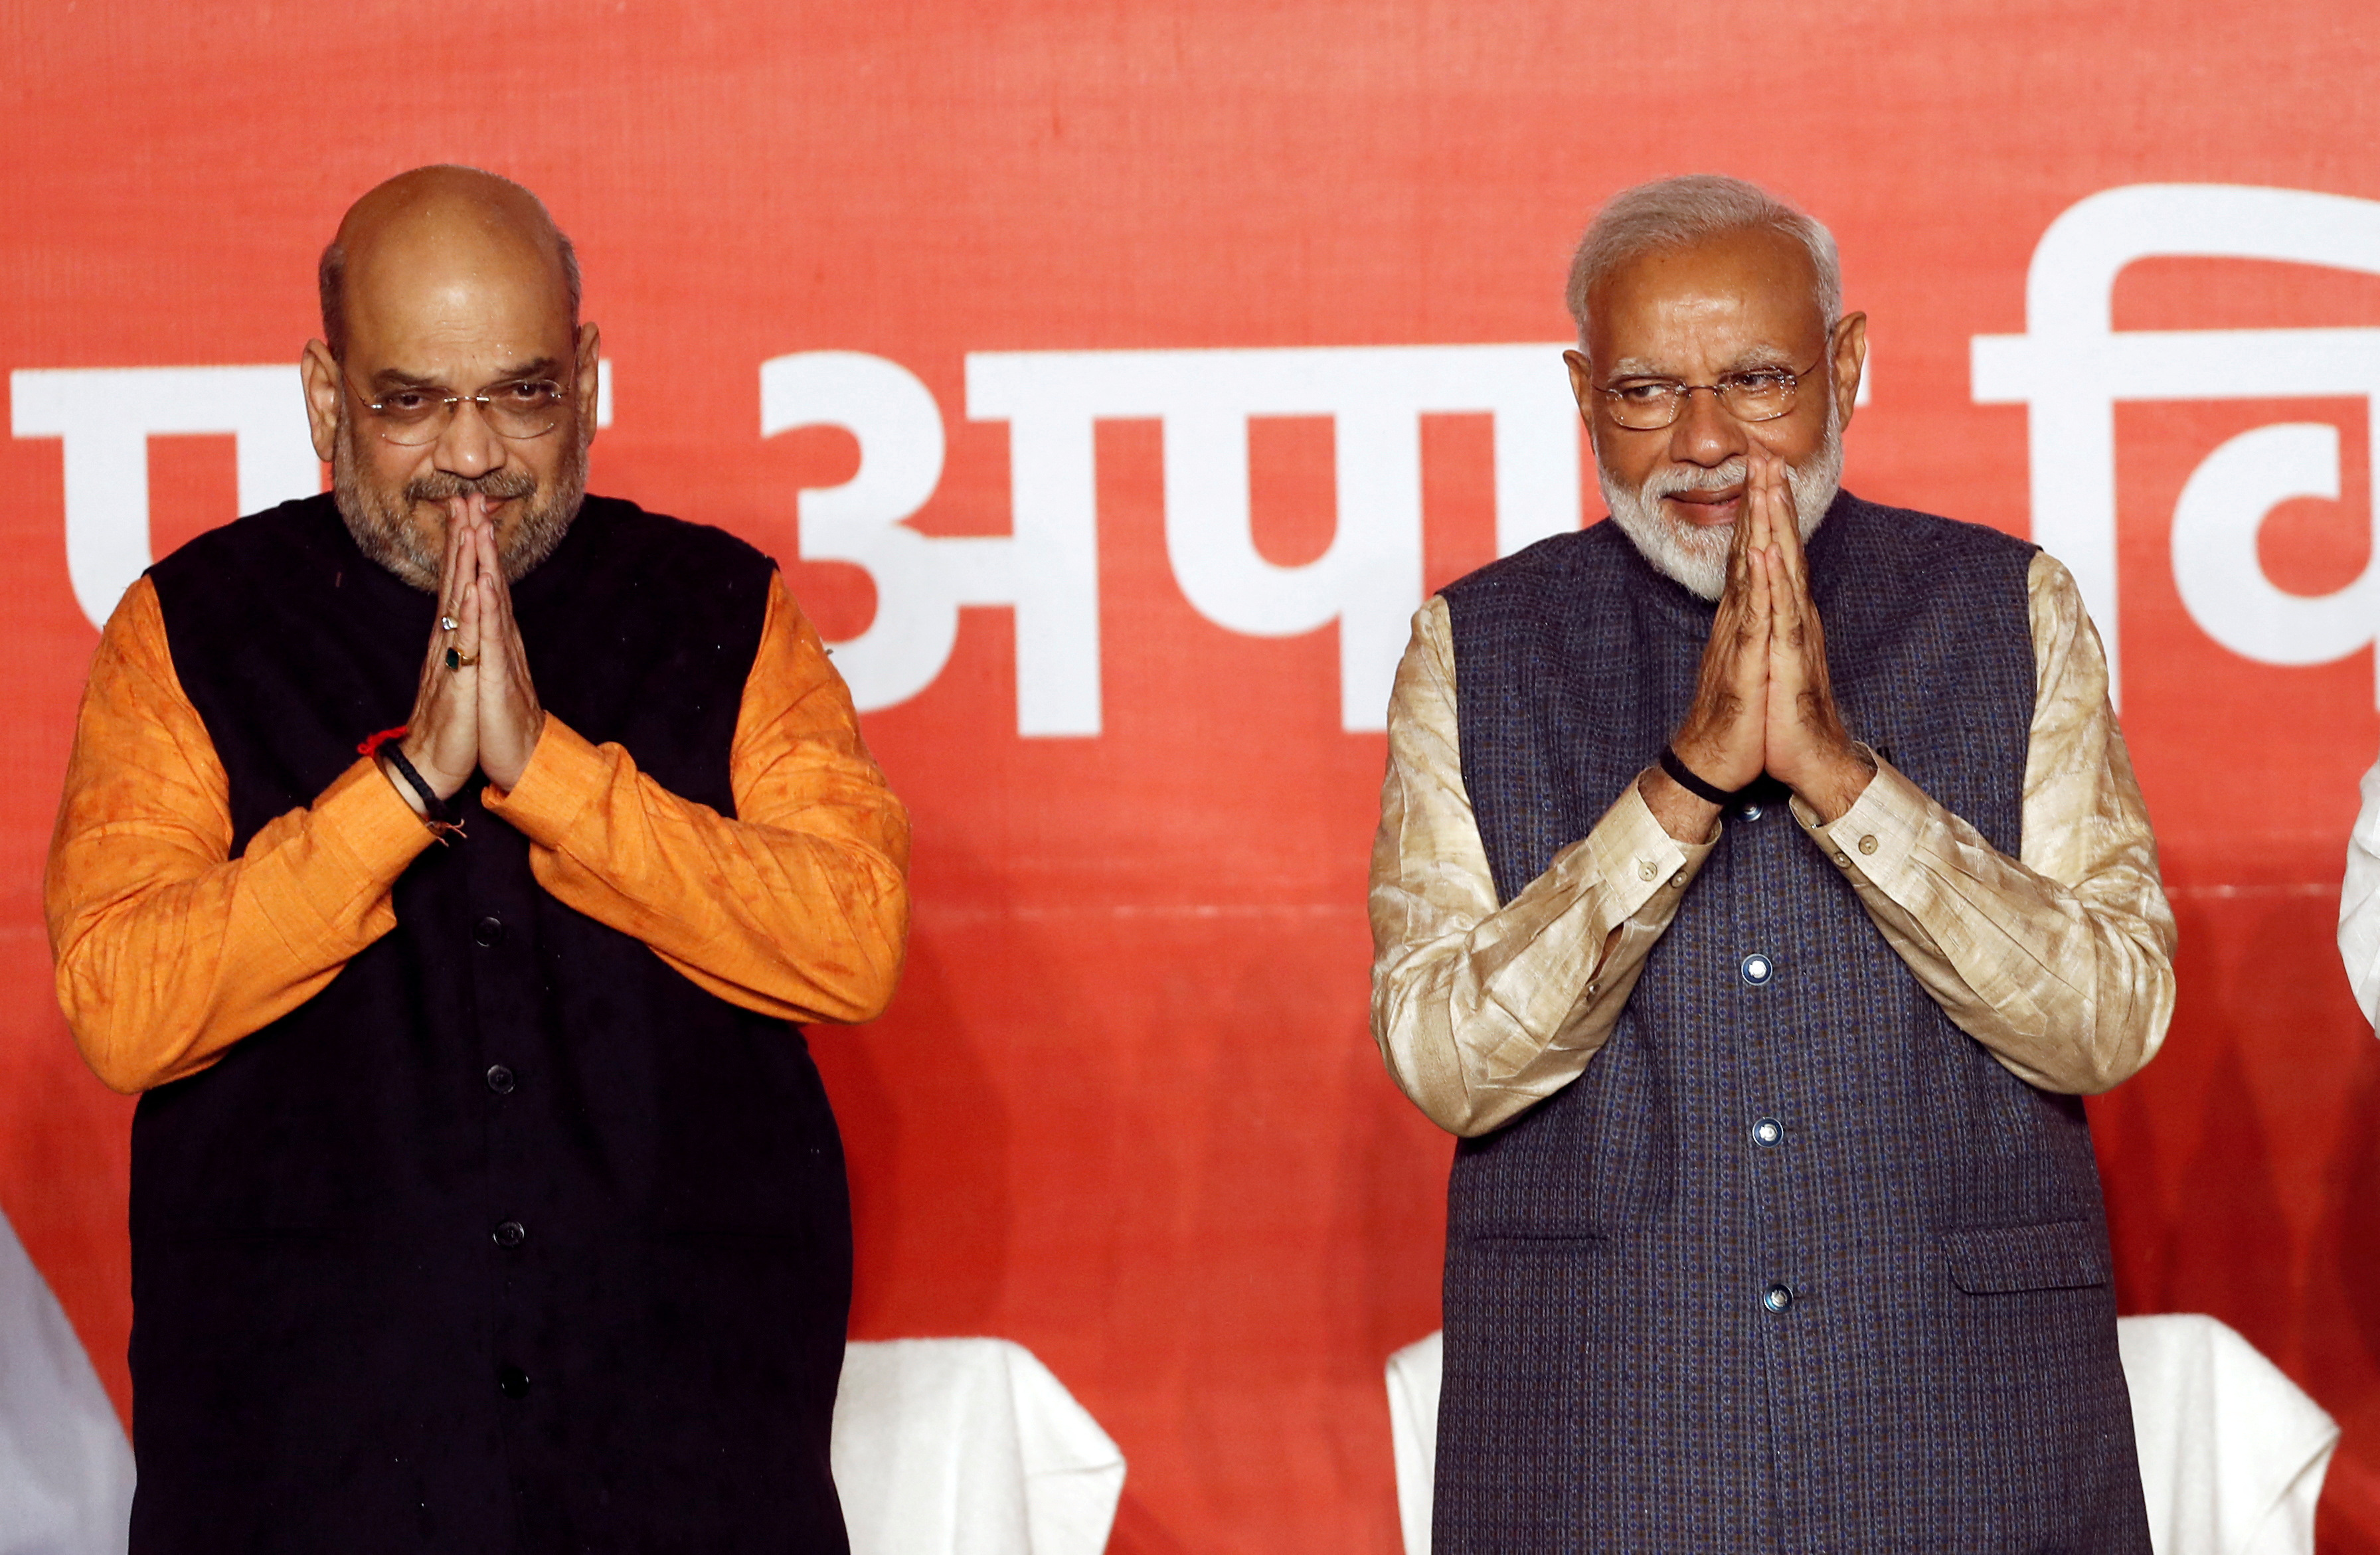 BJP President Amit Shah and Indian Prime Minister Narendra Modi gesture after the election results in New Delhi